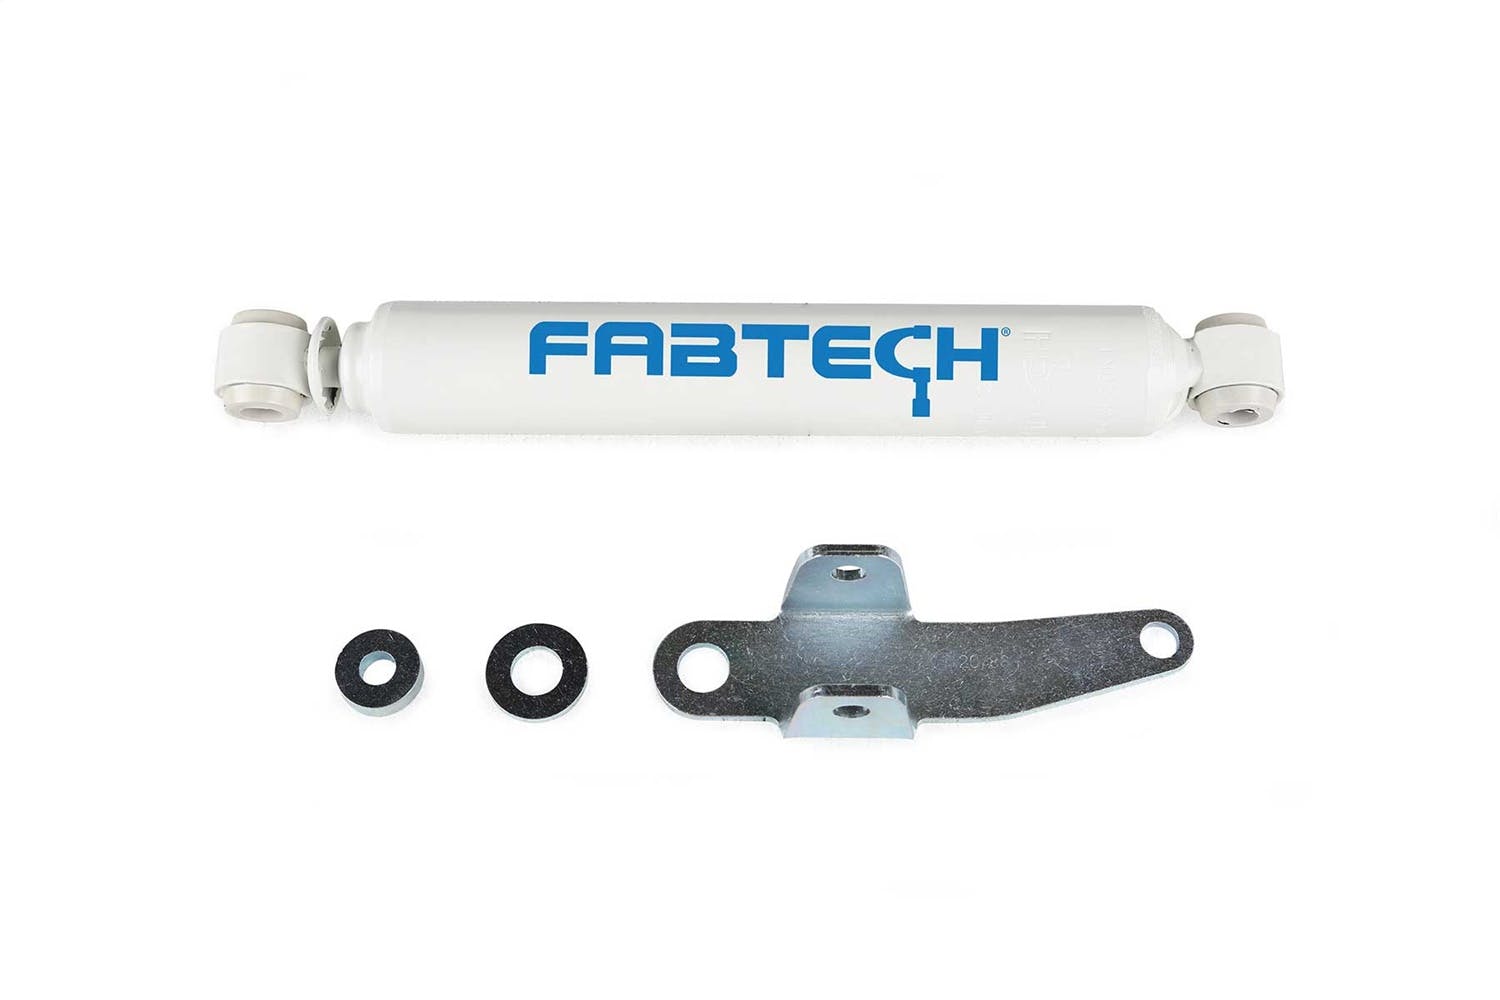 Fabtech FTS8059 Steering Stabilizer Kit